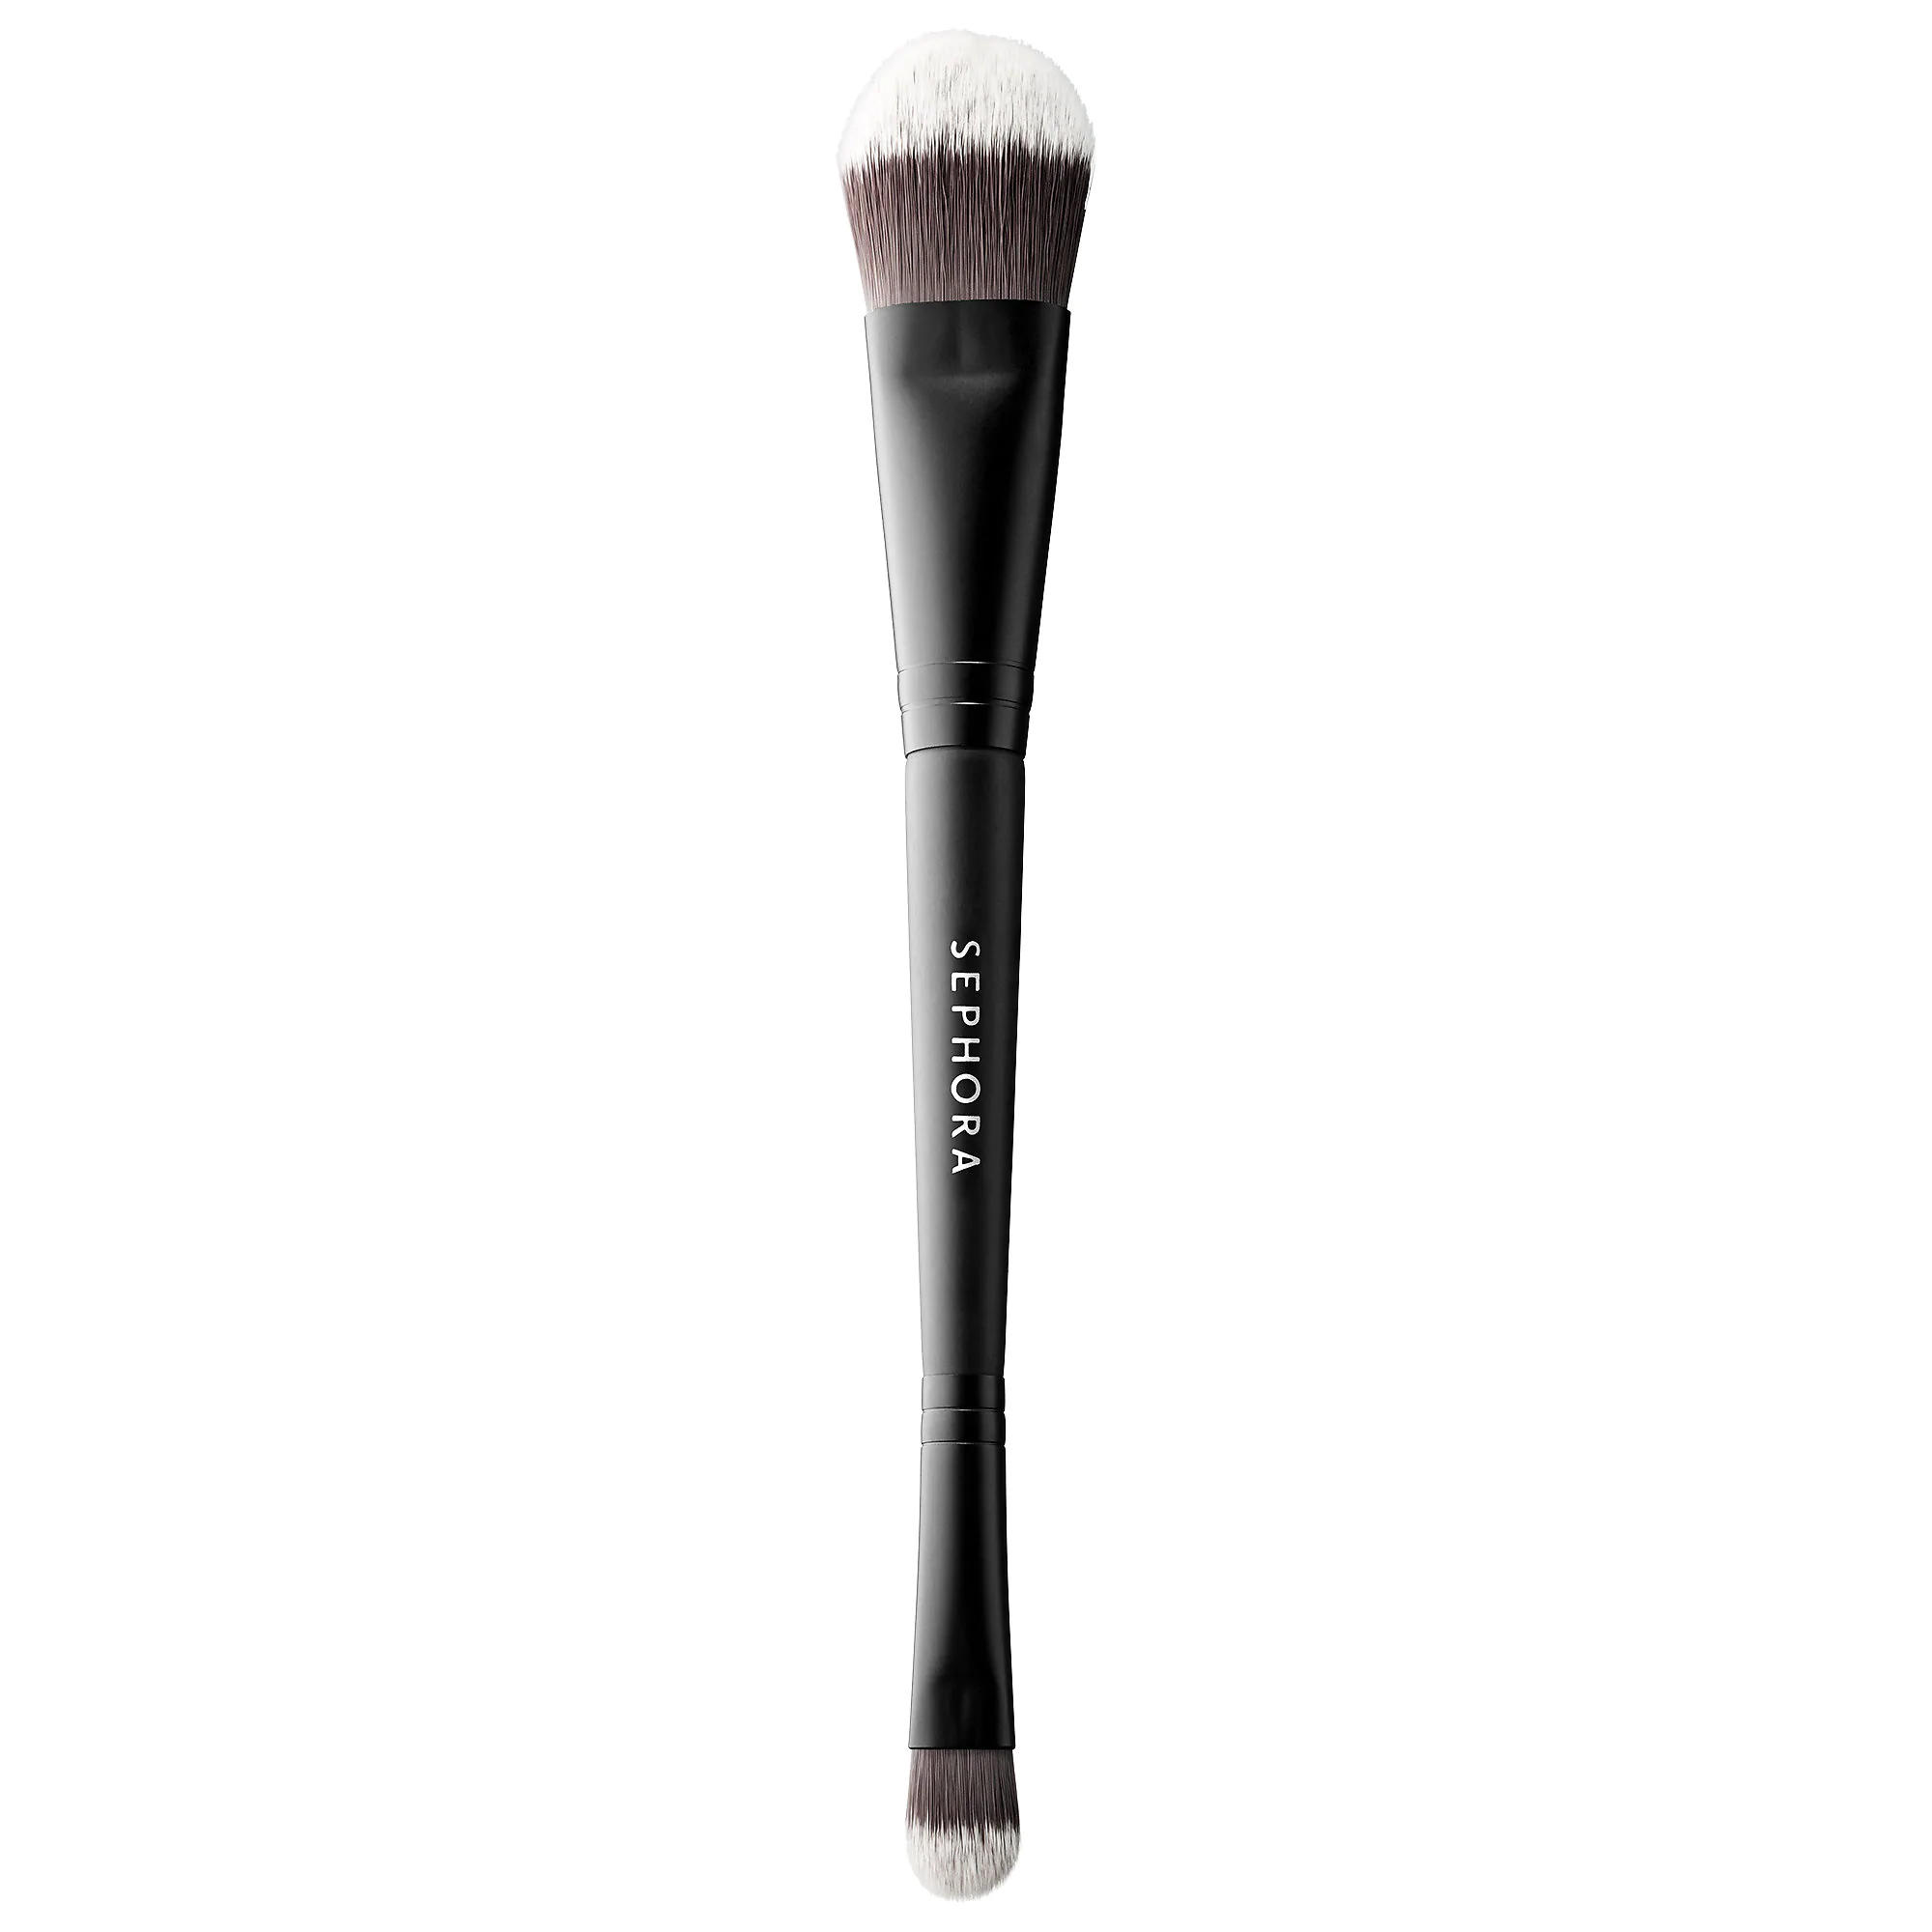 Sephora Classic Double Ended Foundation & Concealer Brush 203